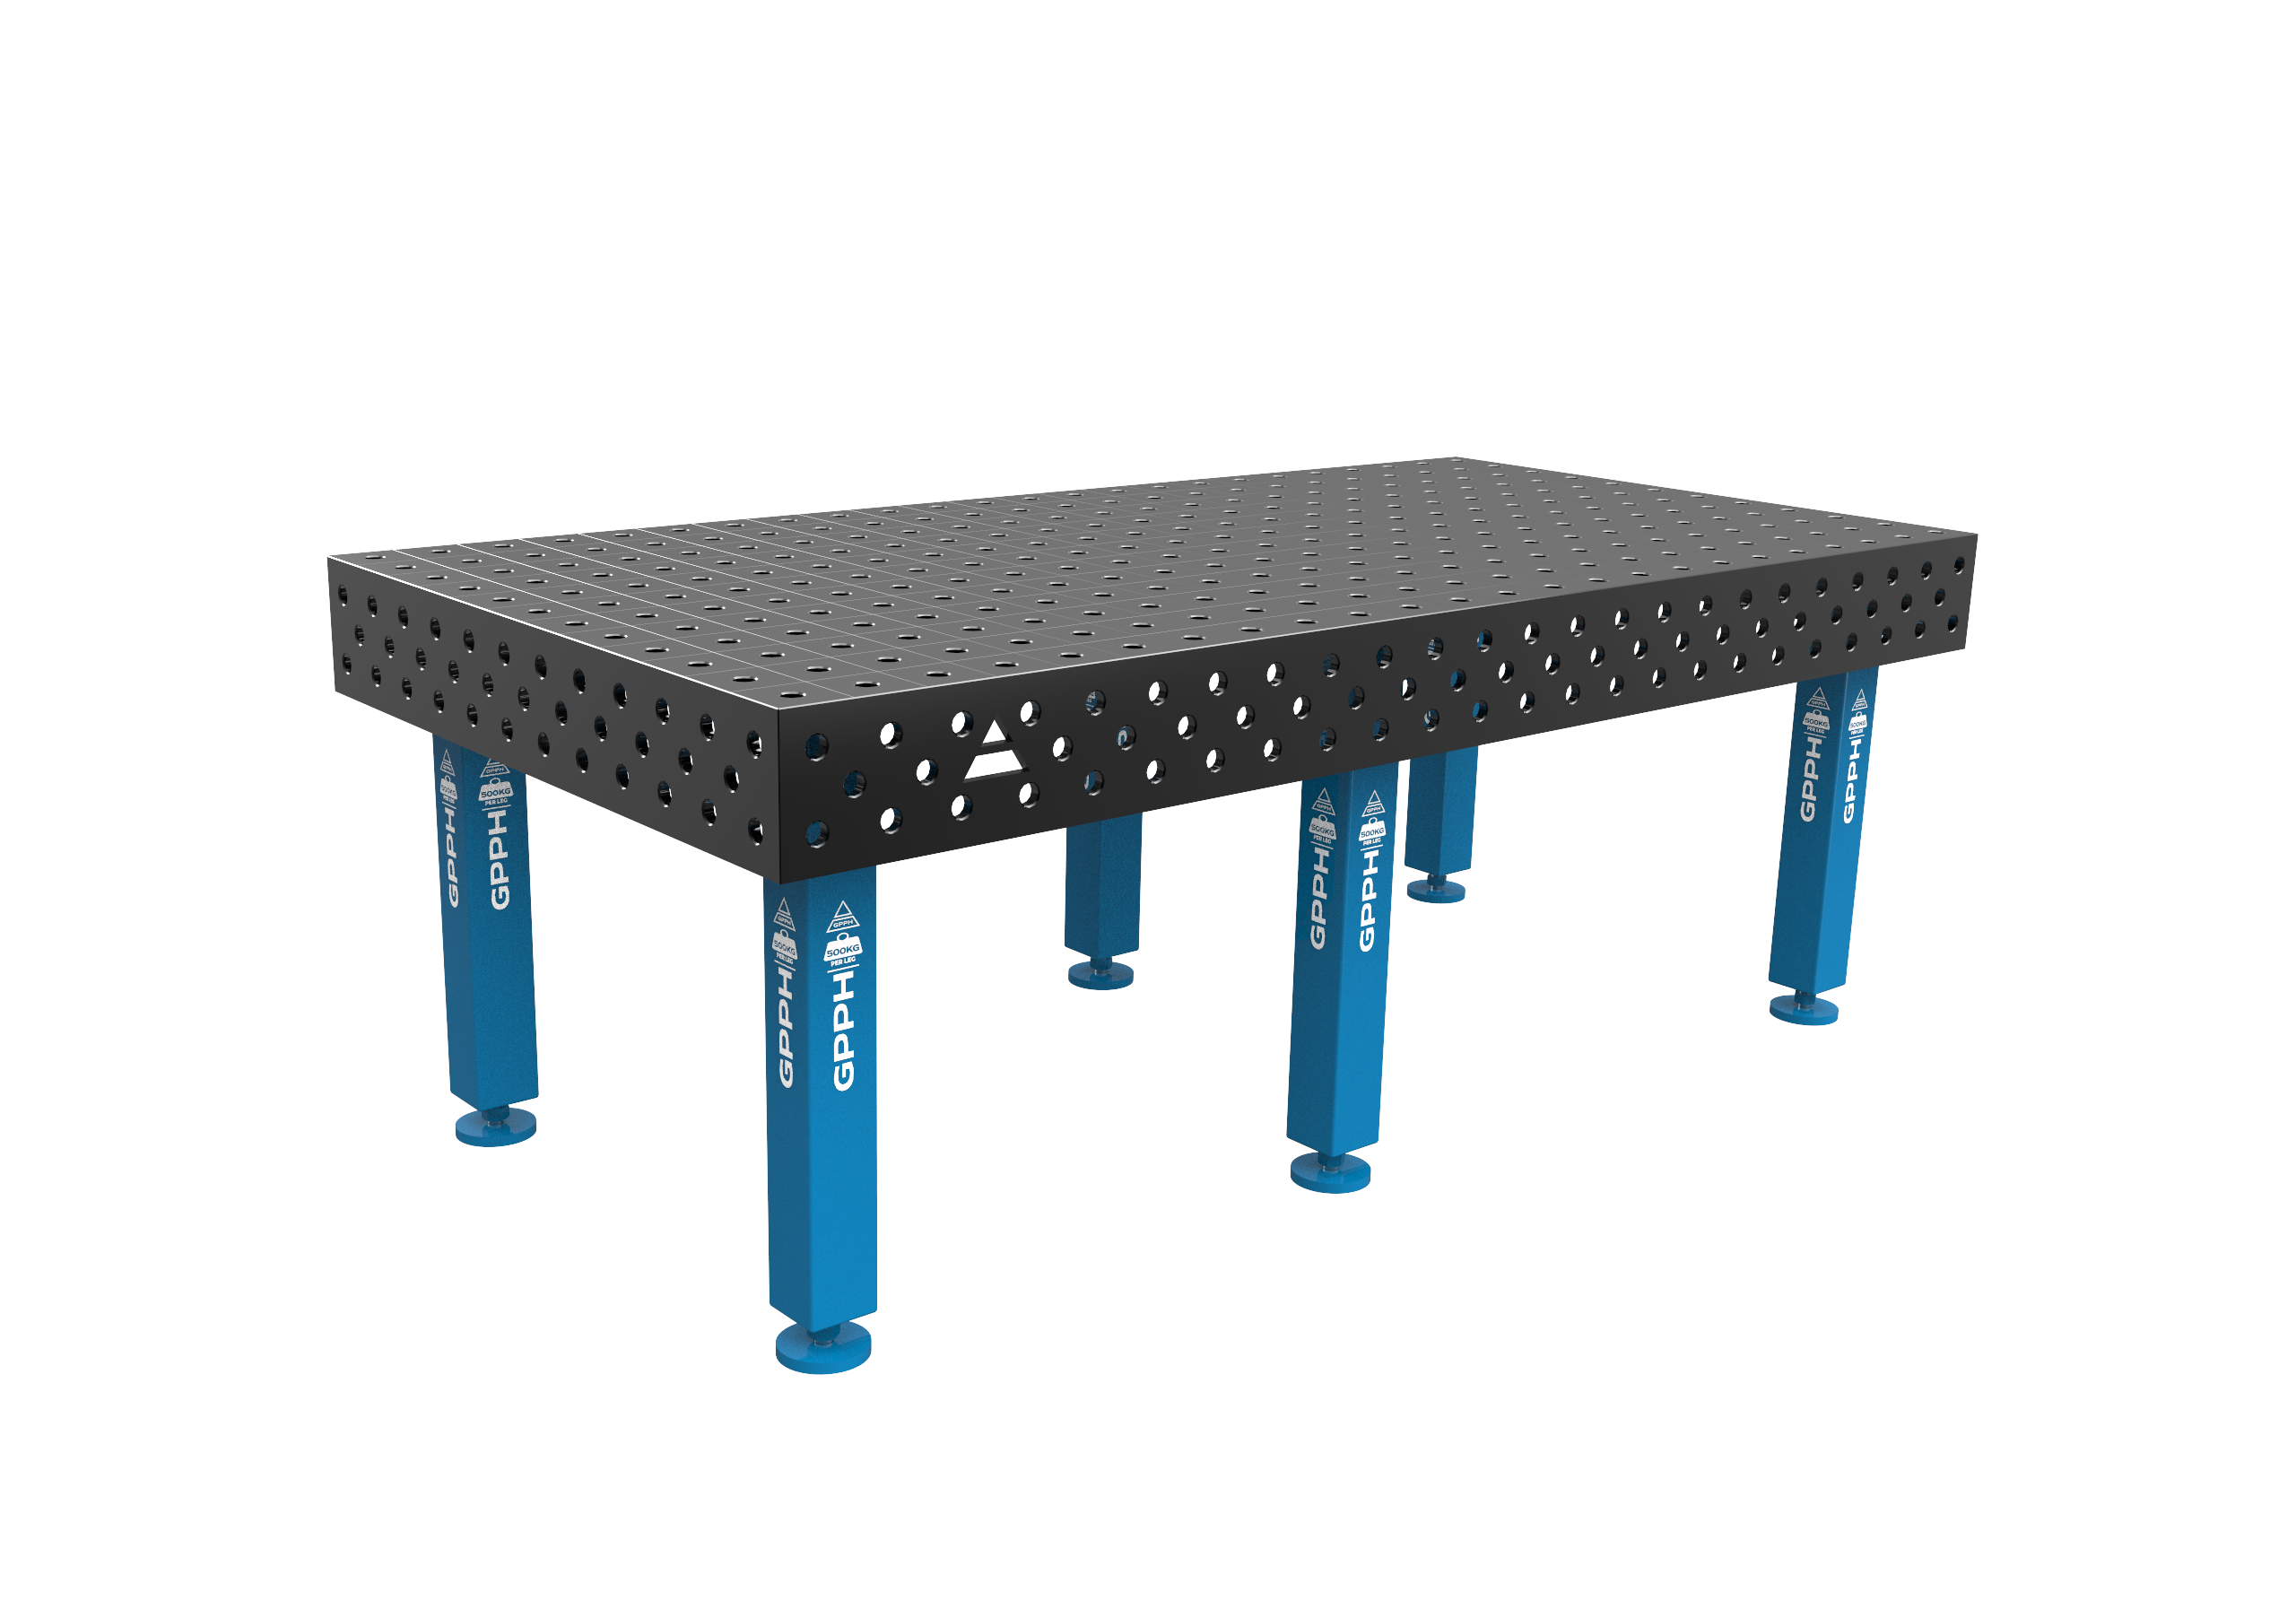 This is an image of our Traditional Welding Tables